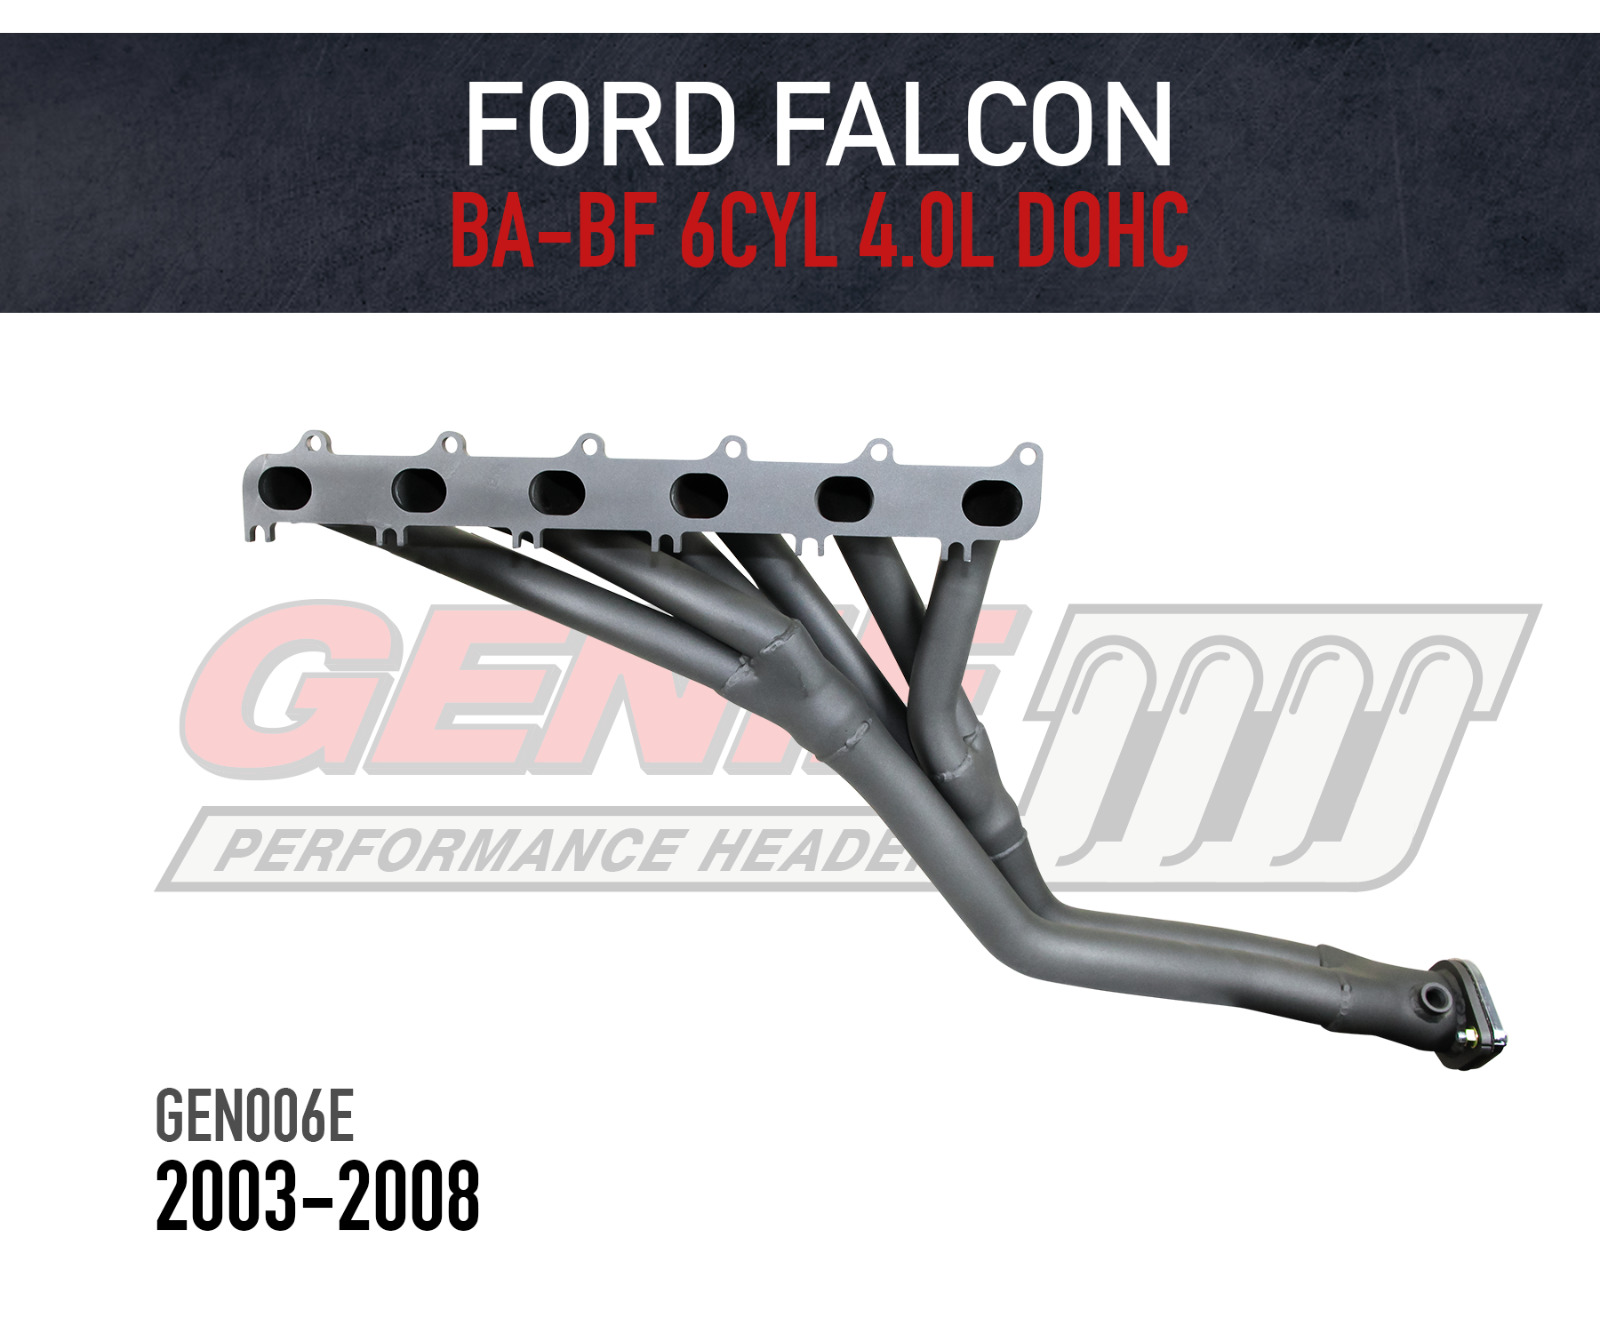 GENIE Headers / Extractors to suit Ford Falcon BA, BF (inc XR6) 4.0L (2003-2008)